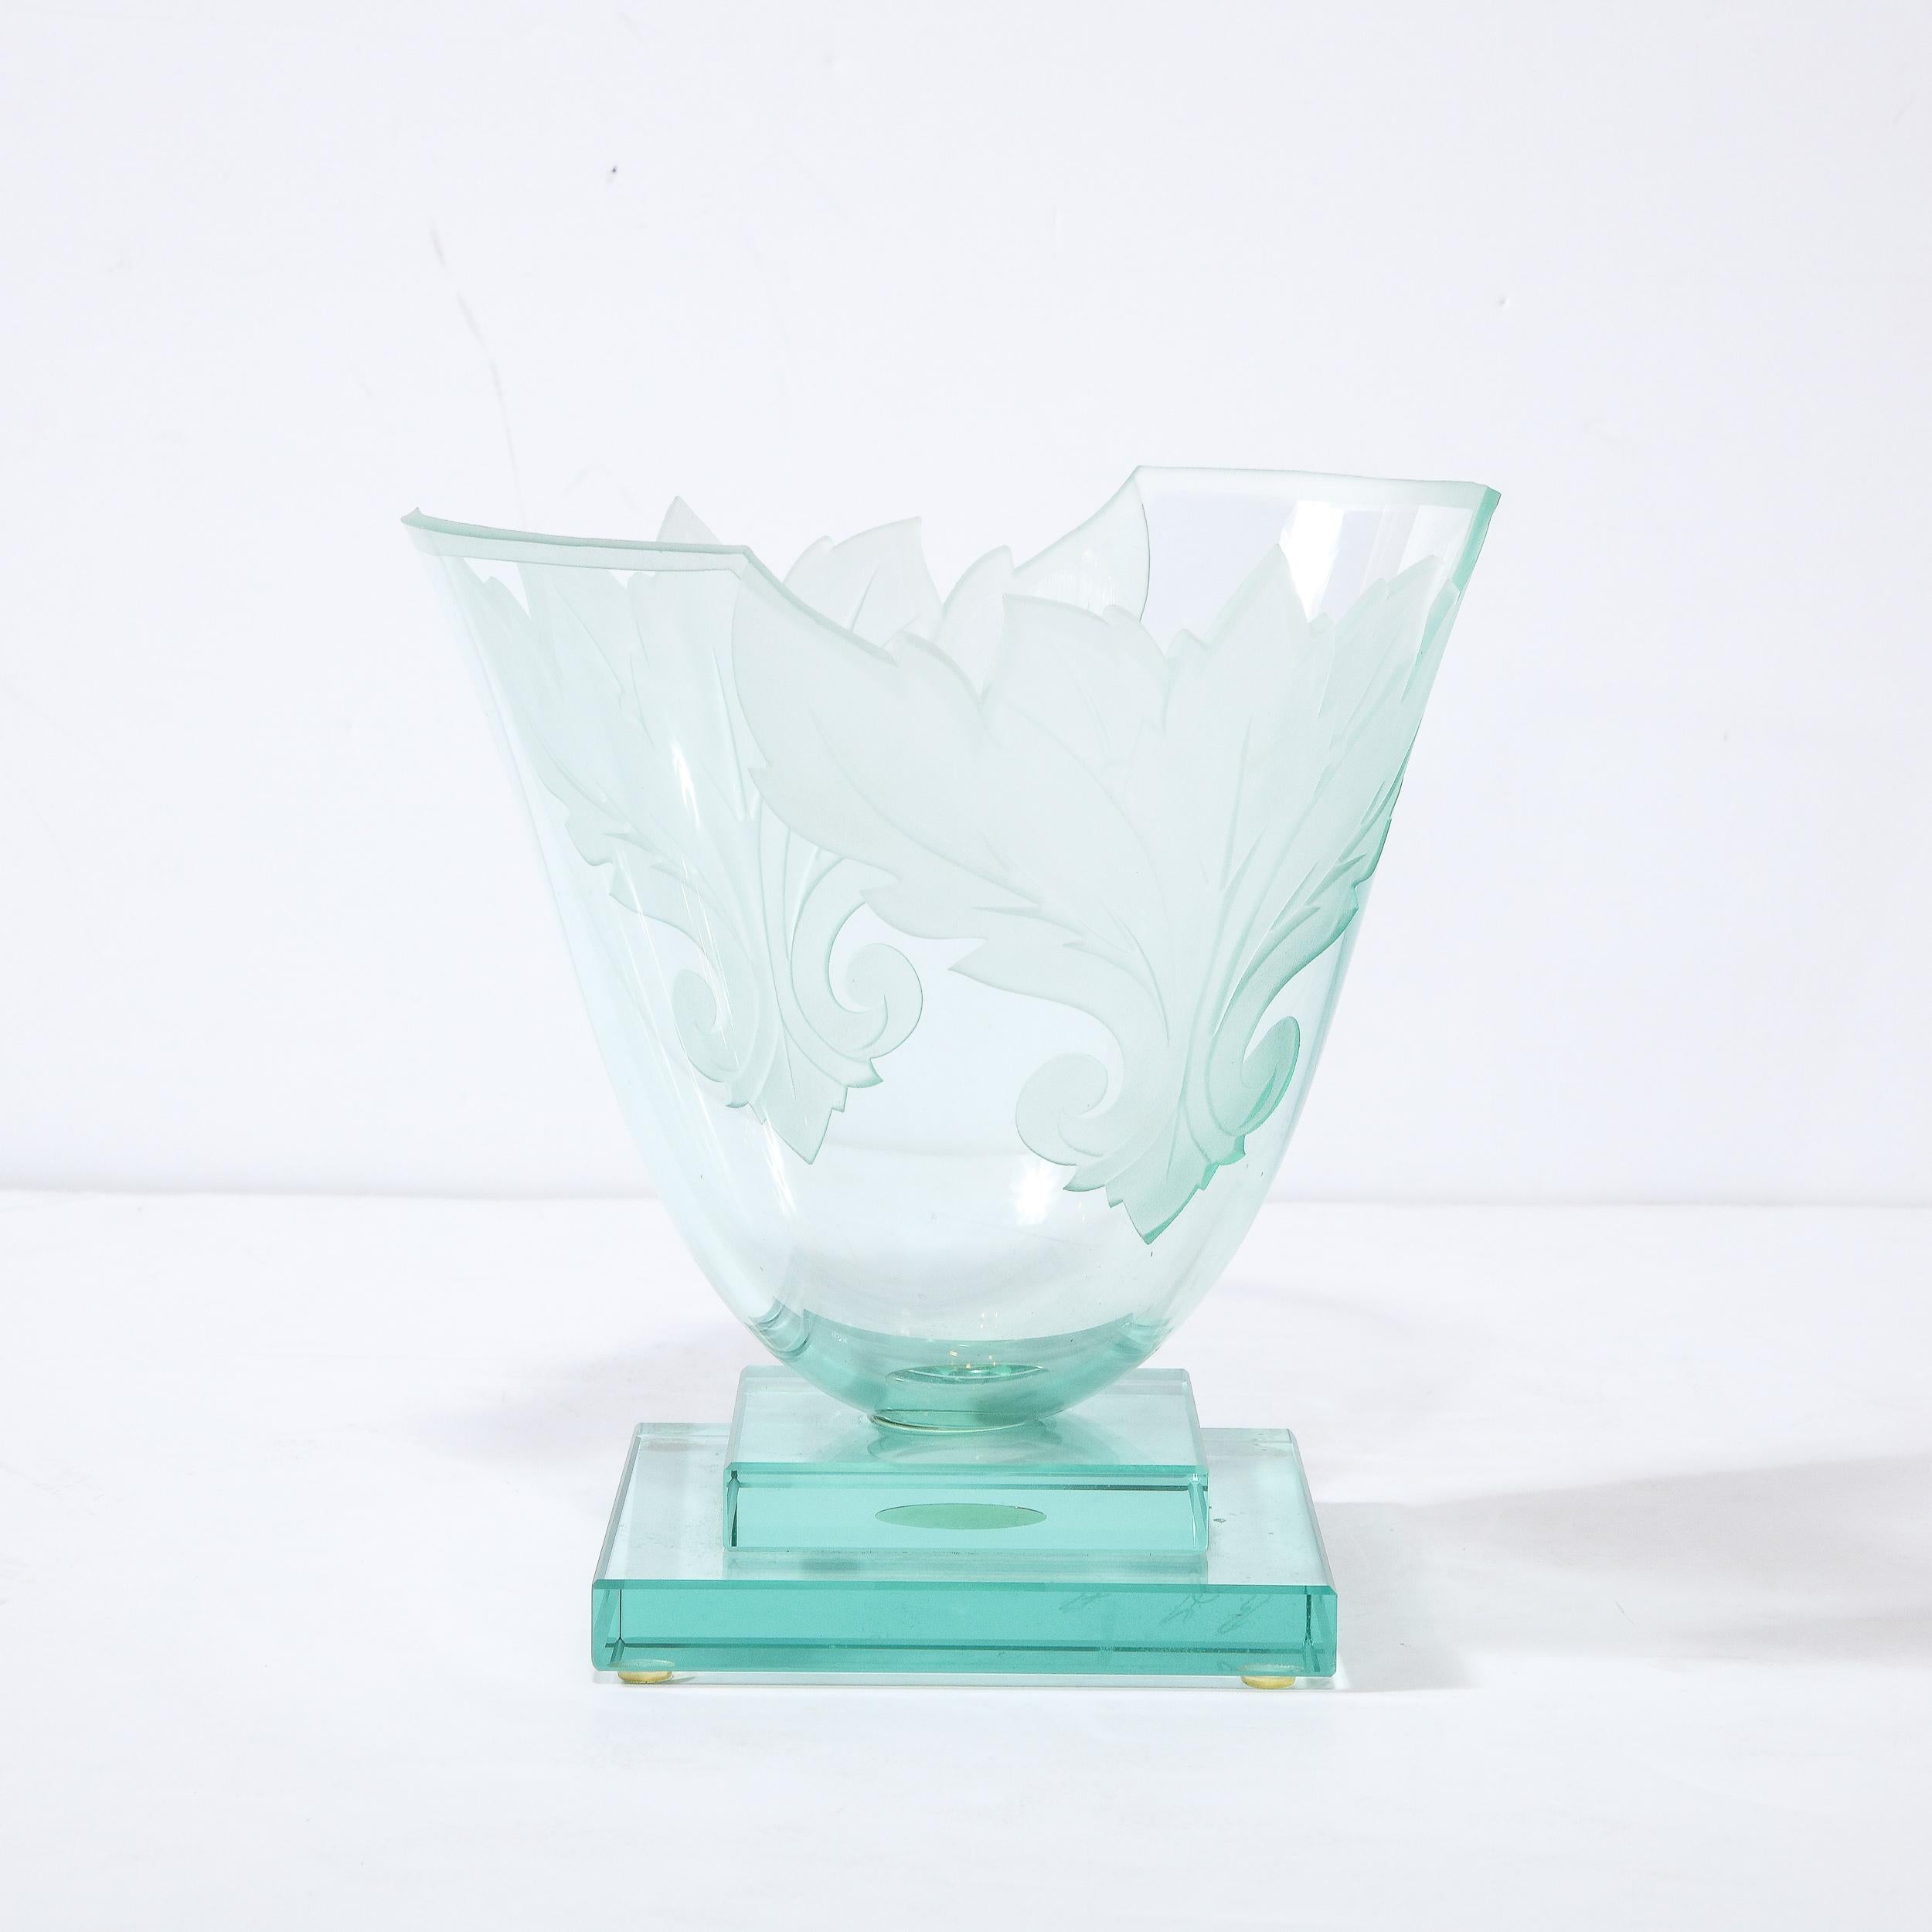 This stunning modernist vase was realized by the esteemed artisan Robert Guenter in the United States circa 1990. It features a tiered skyscraper style geometric base consisting of stacked rectilinear forms from which an urn form body ascends- all